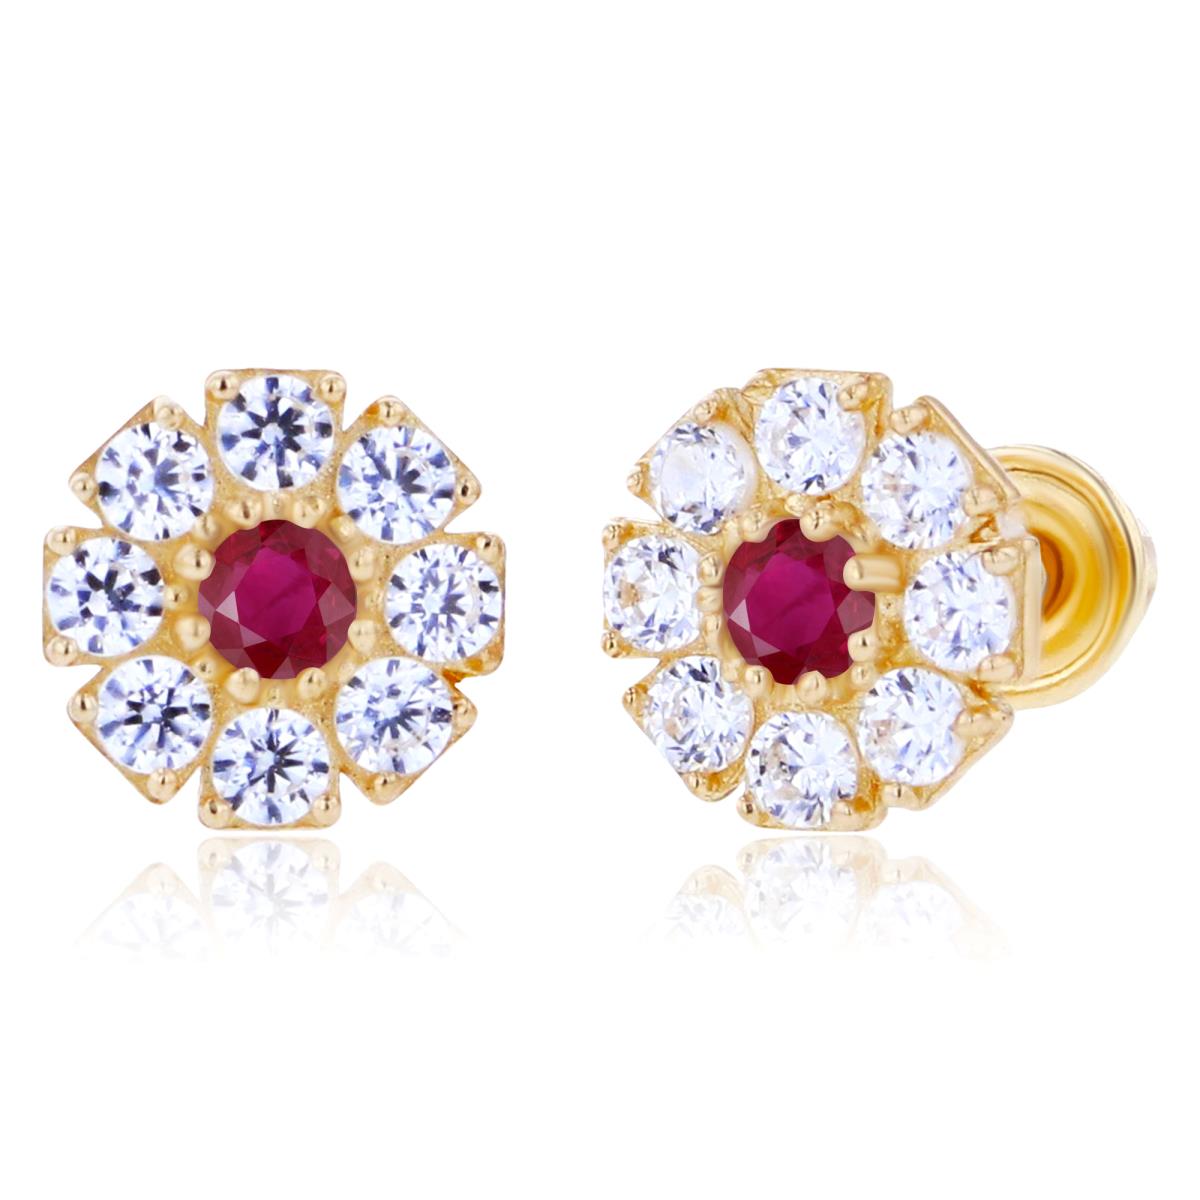 14K Yellow Gold 2mm Round Ruby & 1.5mm Created White Sapphire Flower Screwback Earrings